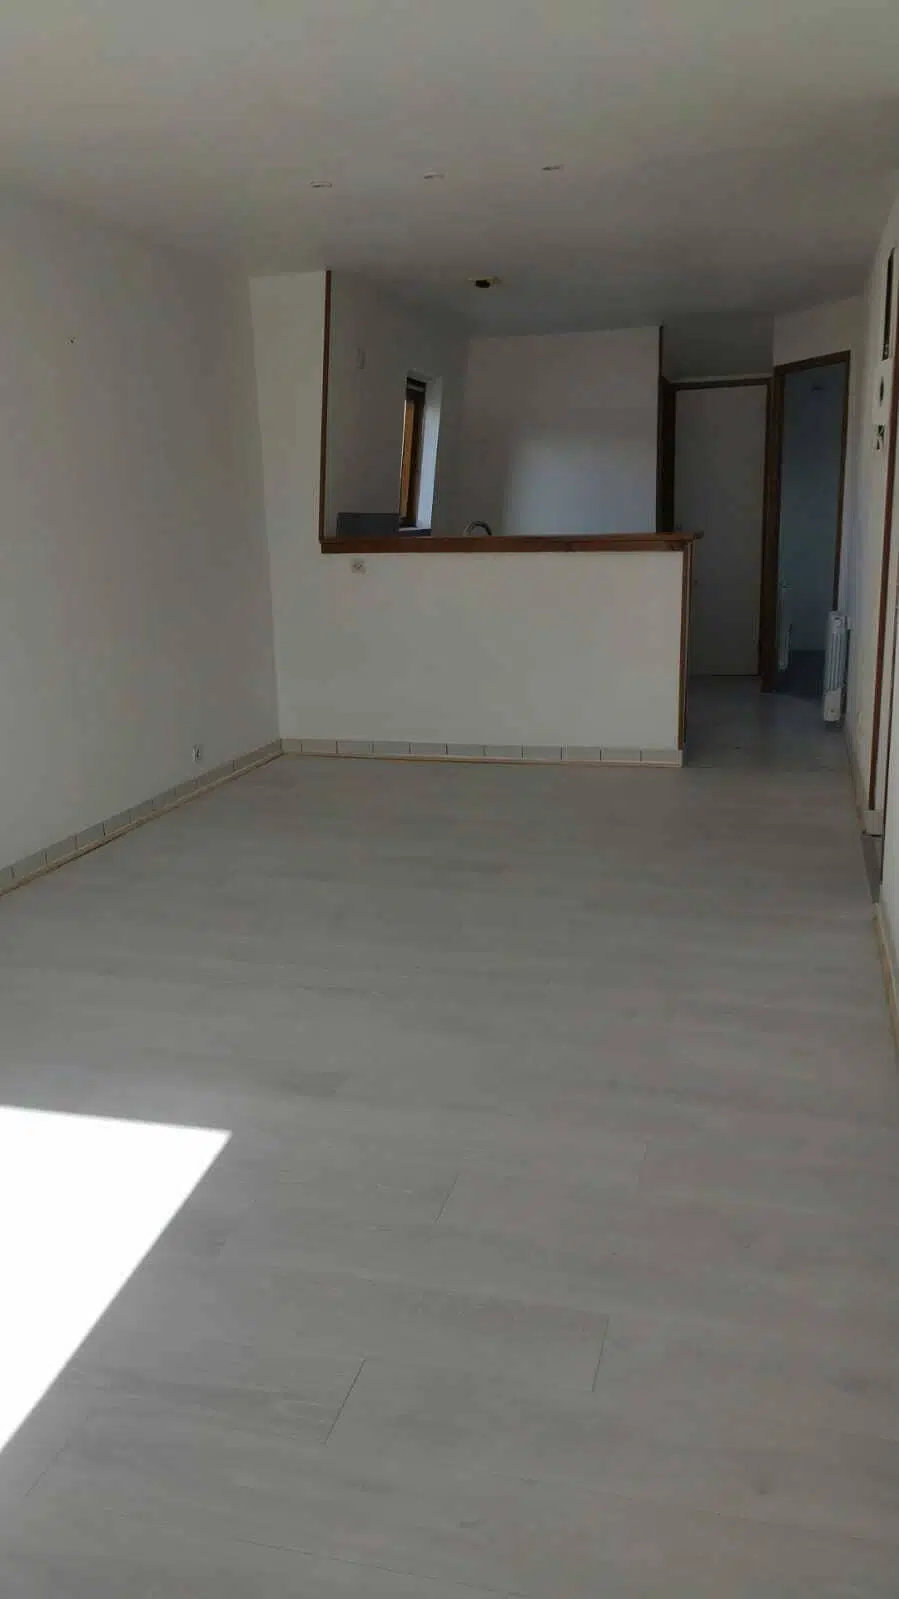 Location Appartement type F2 Le Havre 2058